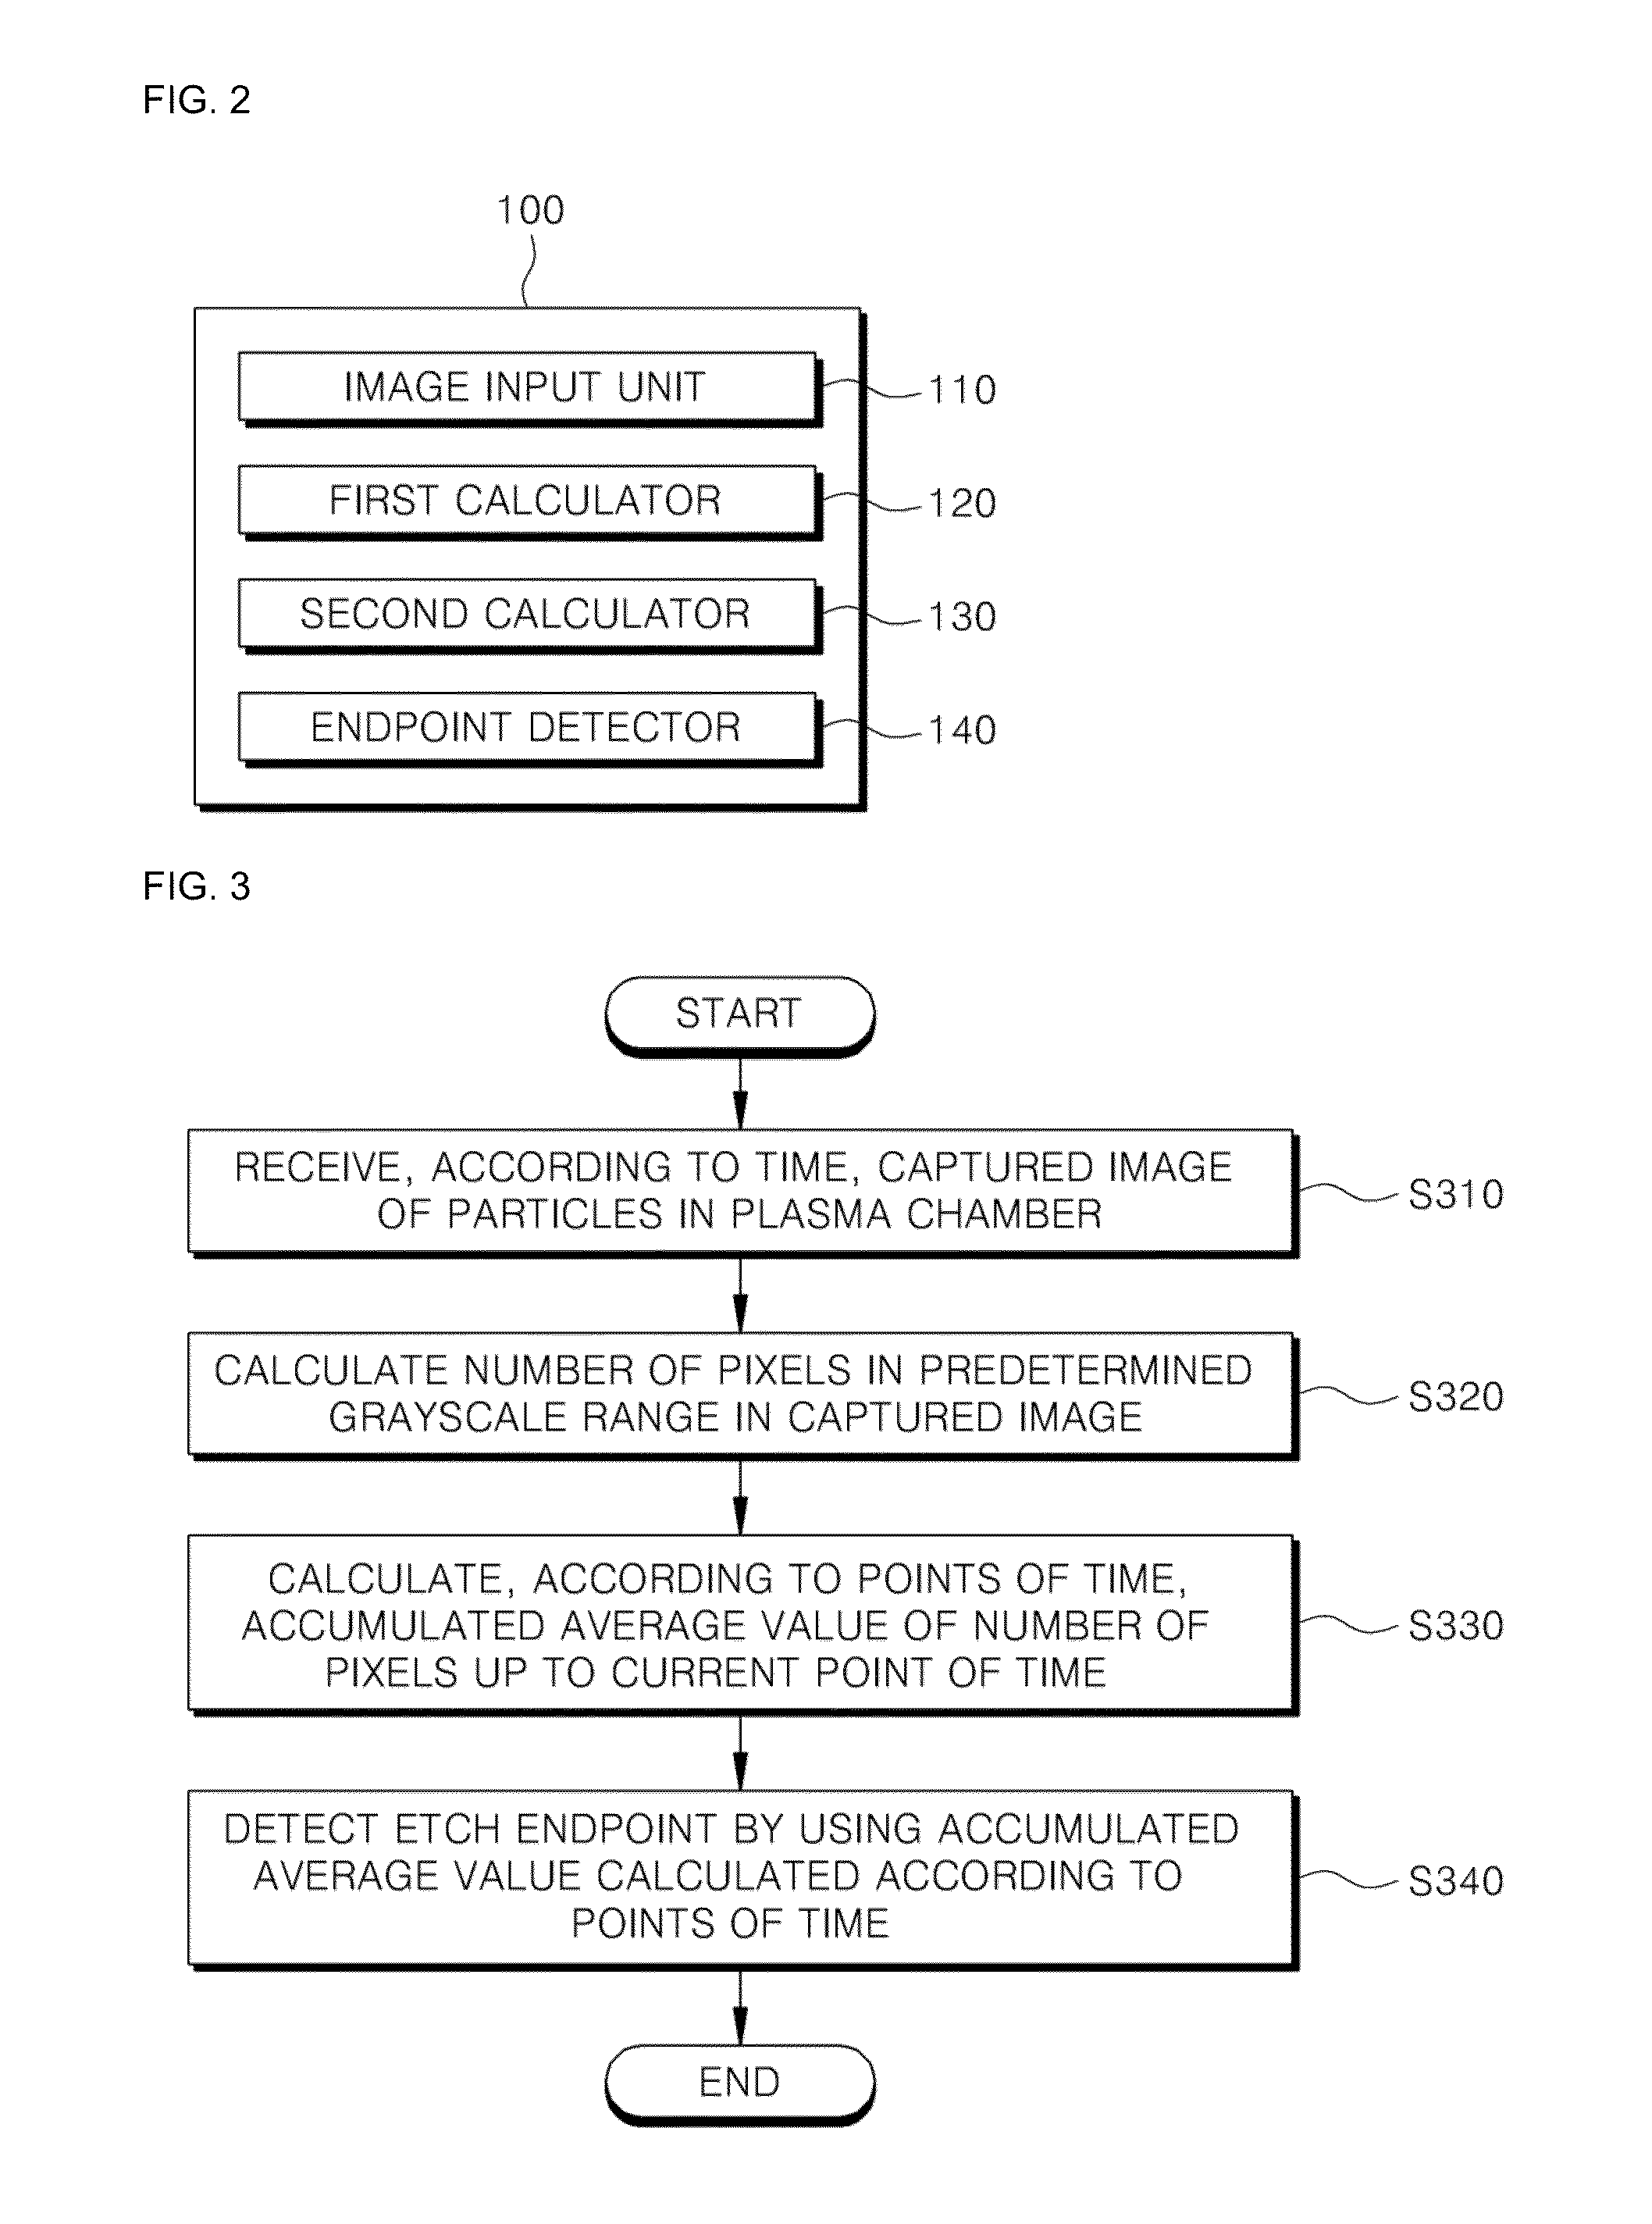 Apparatus for imaging plasma particles and method for detecting etching end point using same